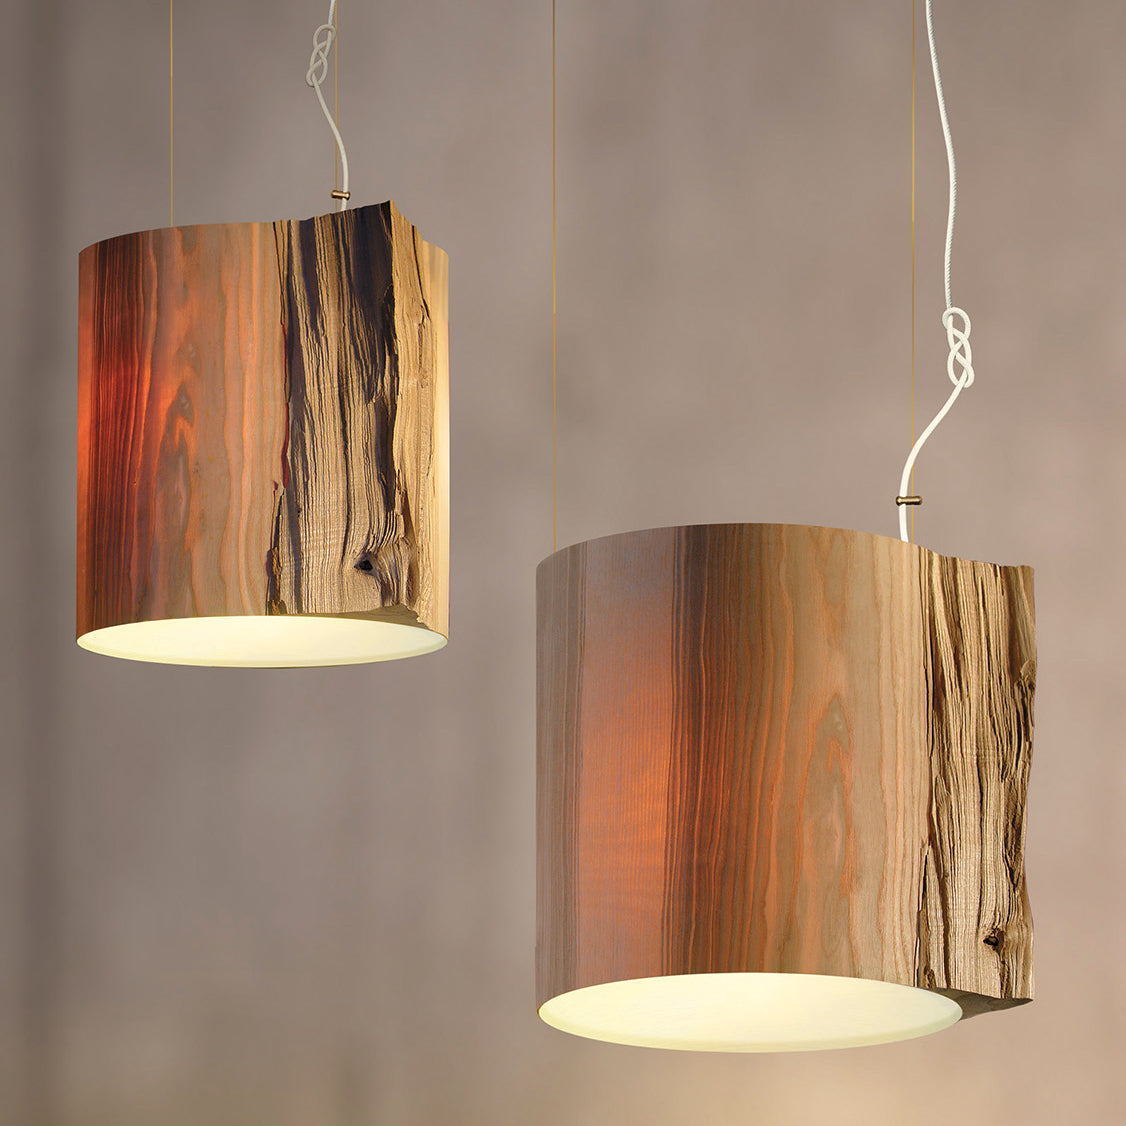 The Wise One Pendant Light